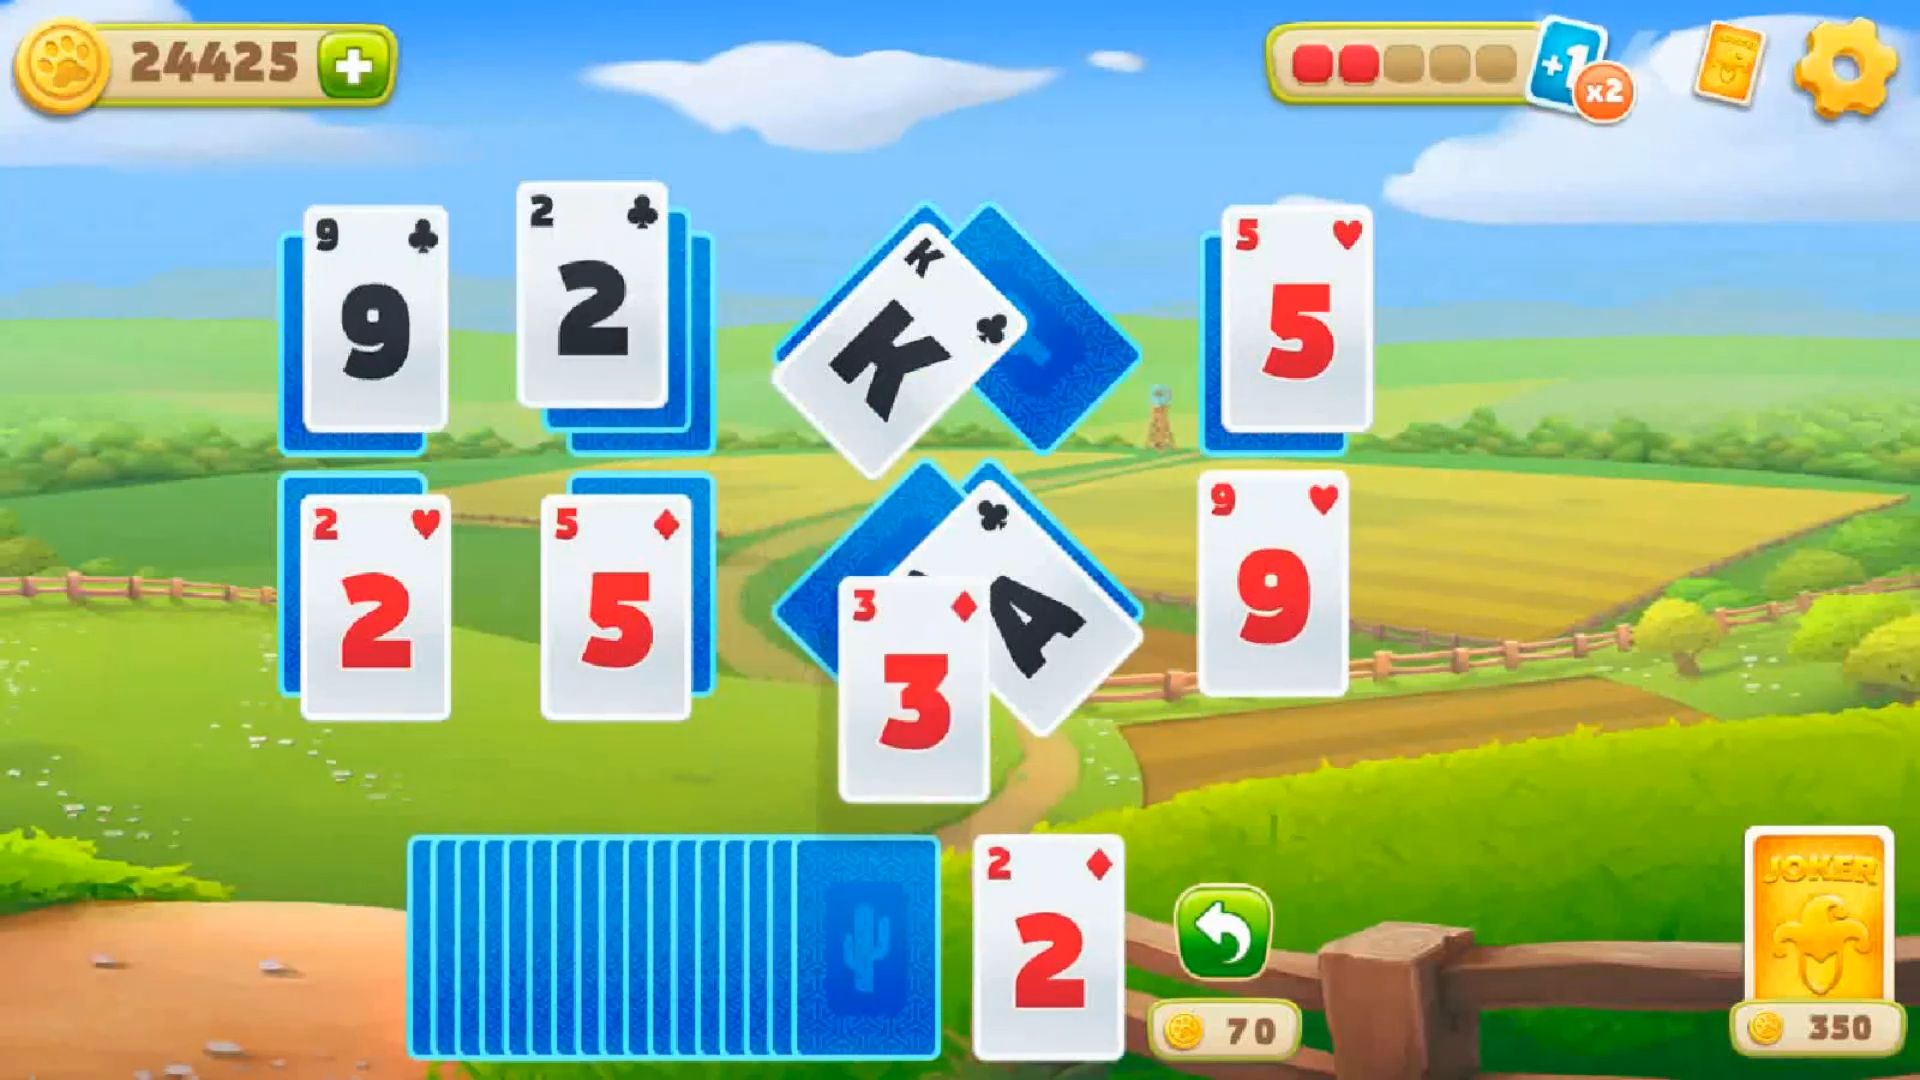 Gameplay of the Solitaire: Texas Village for Android phone or tablet.